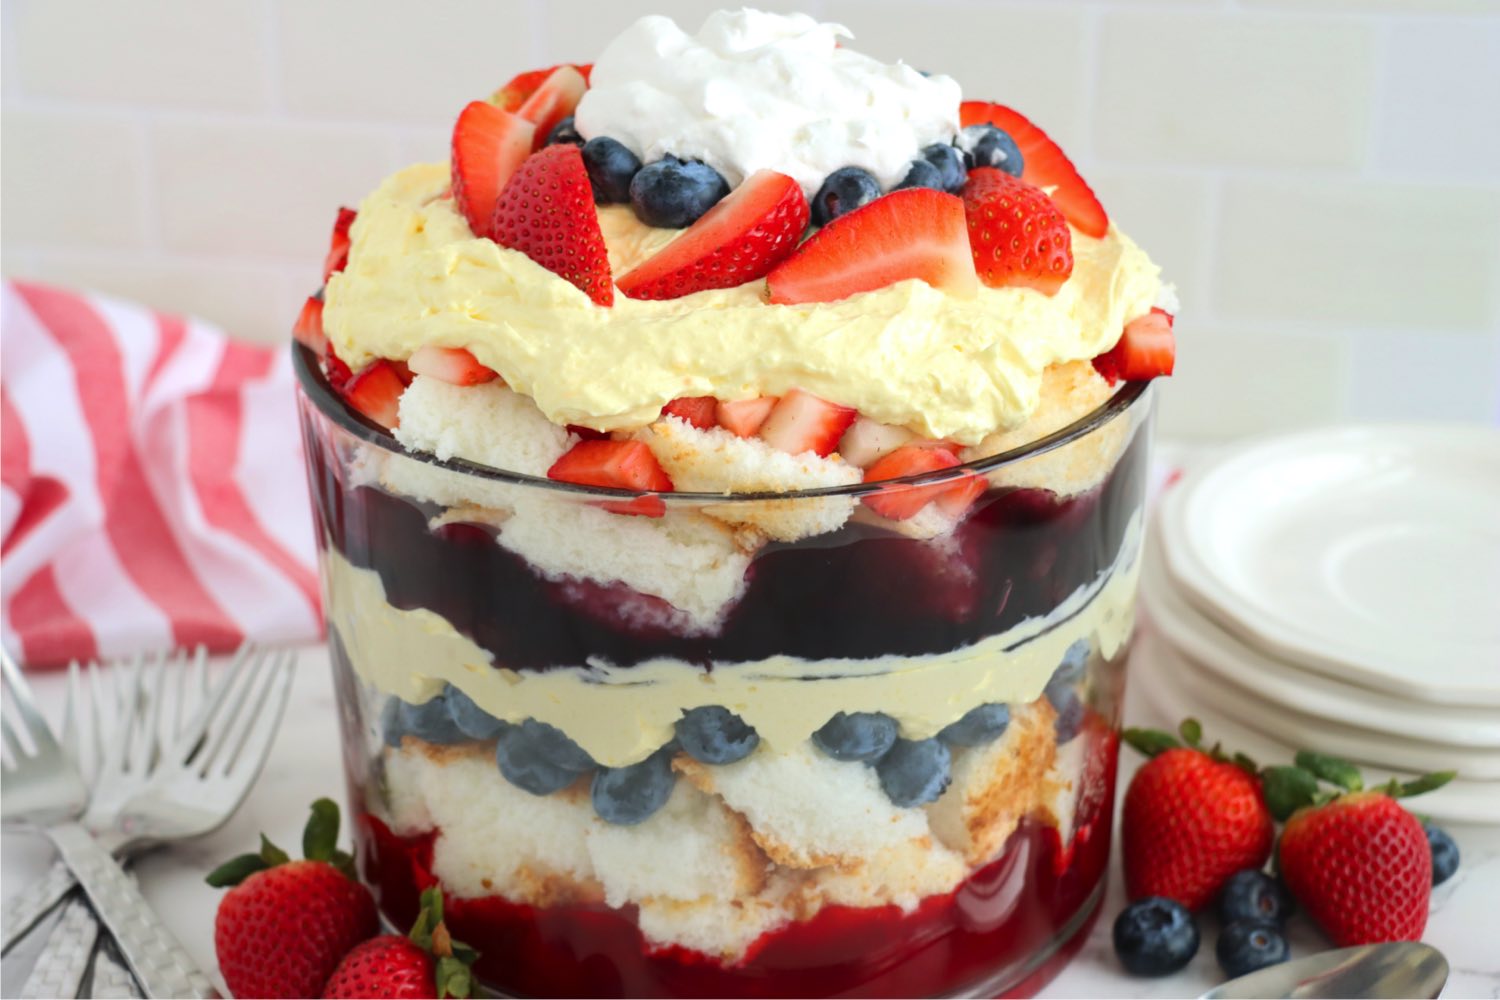 Patriotic-themed trifle displayed on a table